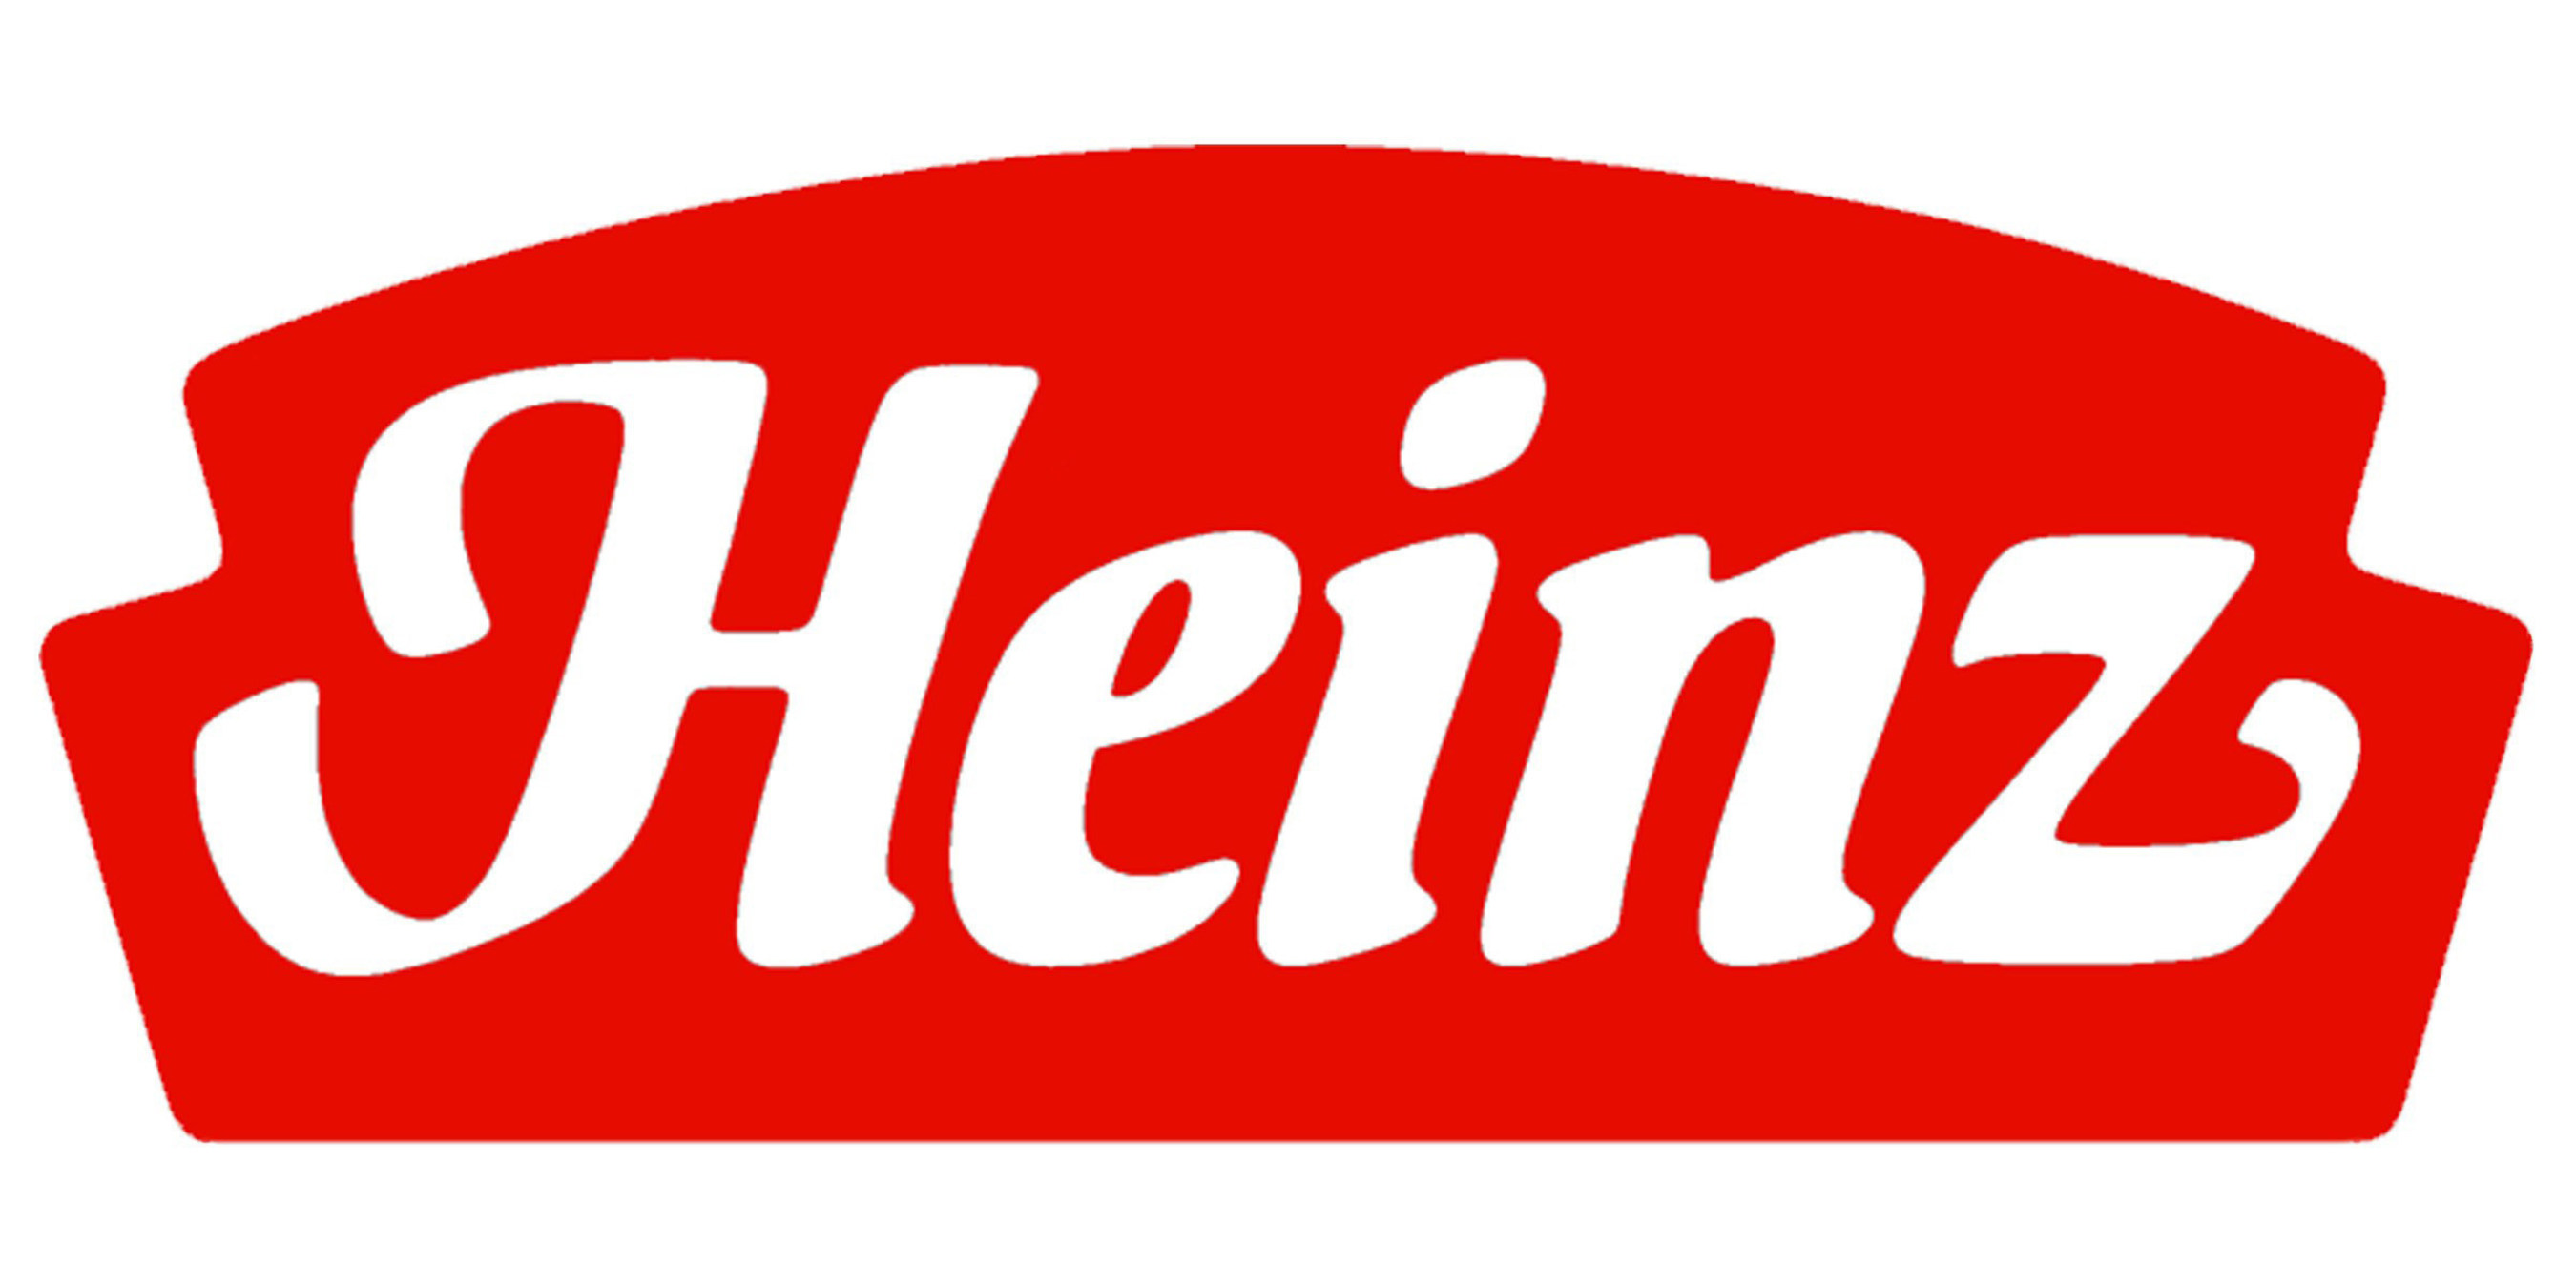 H.J. HEINZ COMPANY AND KRAFT FOODS GROUP ANNOUNCE REGULATORY APPROVAL FROM CANADA'S COMPETITION BUREAU FOR PROPOSED MERGER